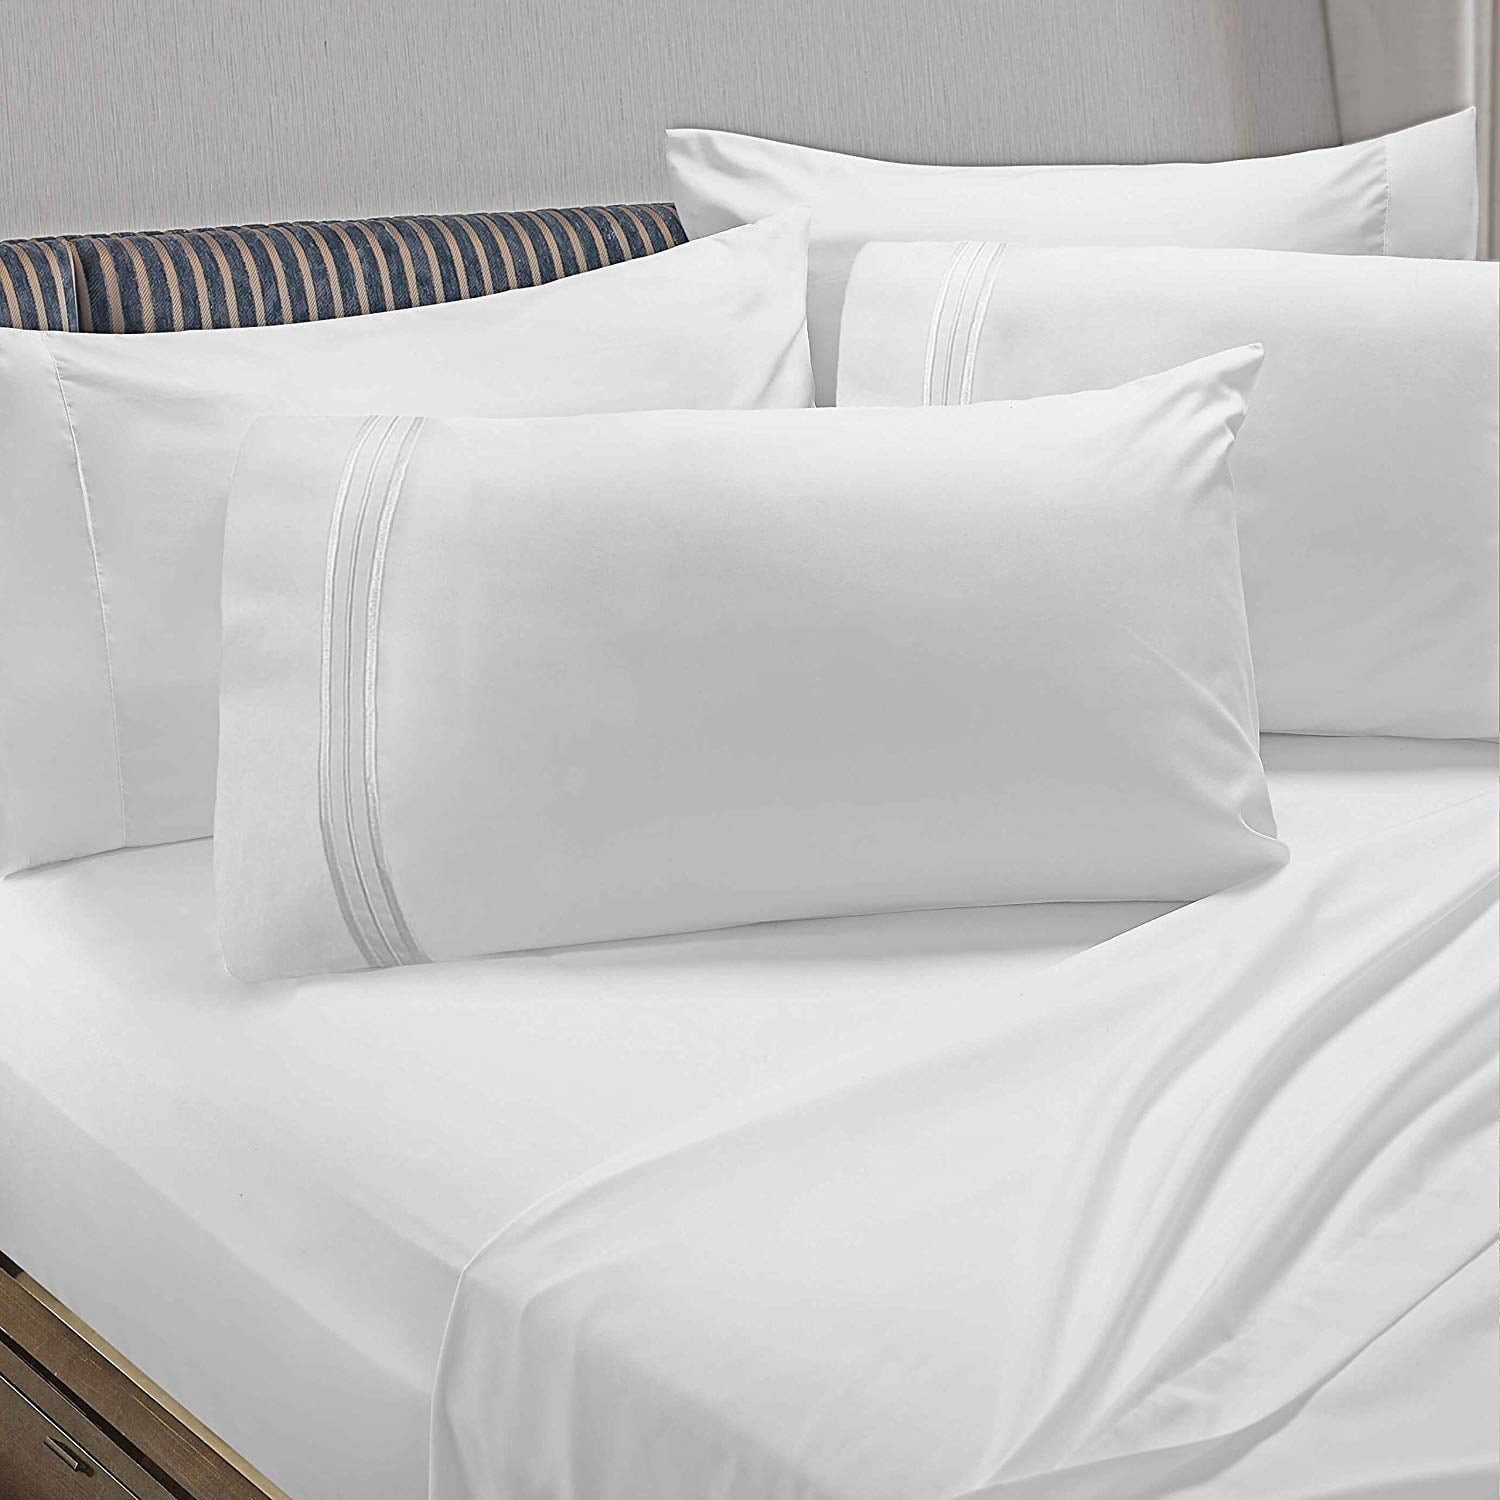 Queen 6 Piece Sheet Set - Breathable & Cooling Bed Sheets - Hotel